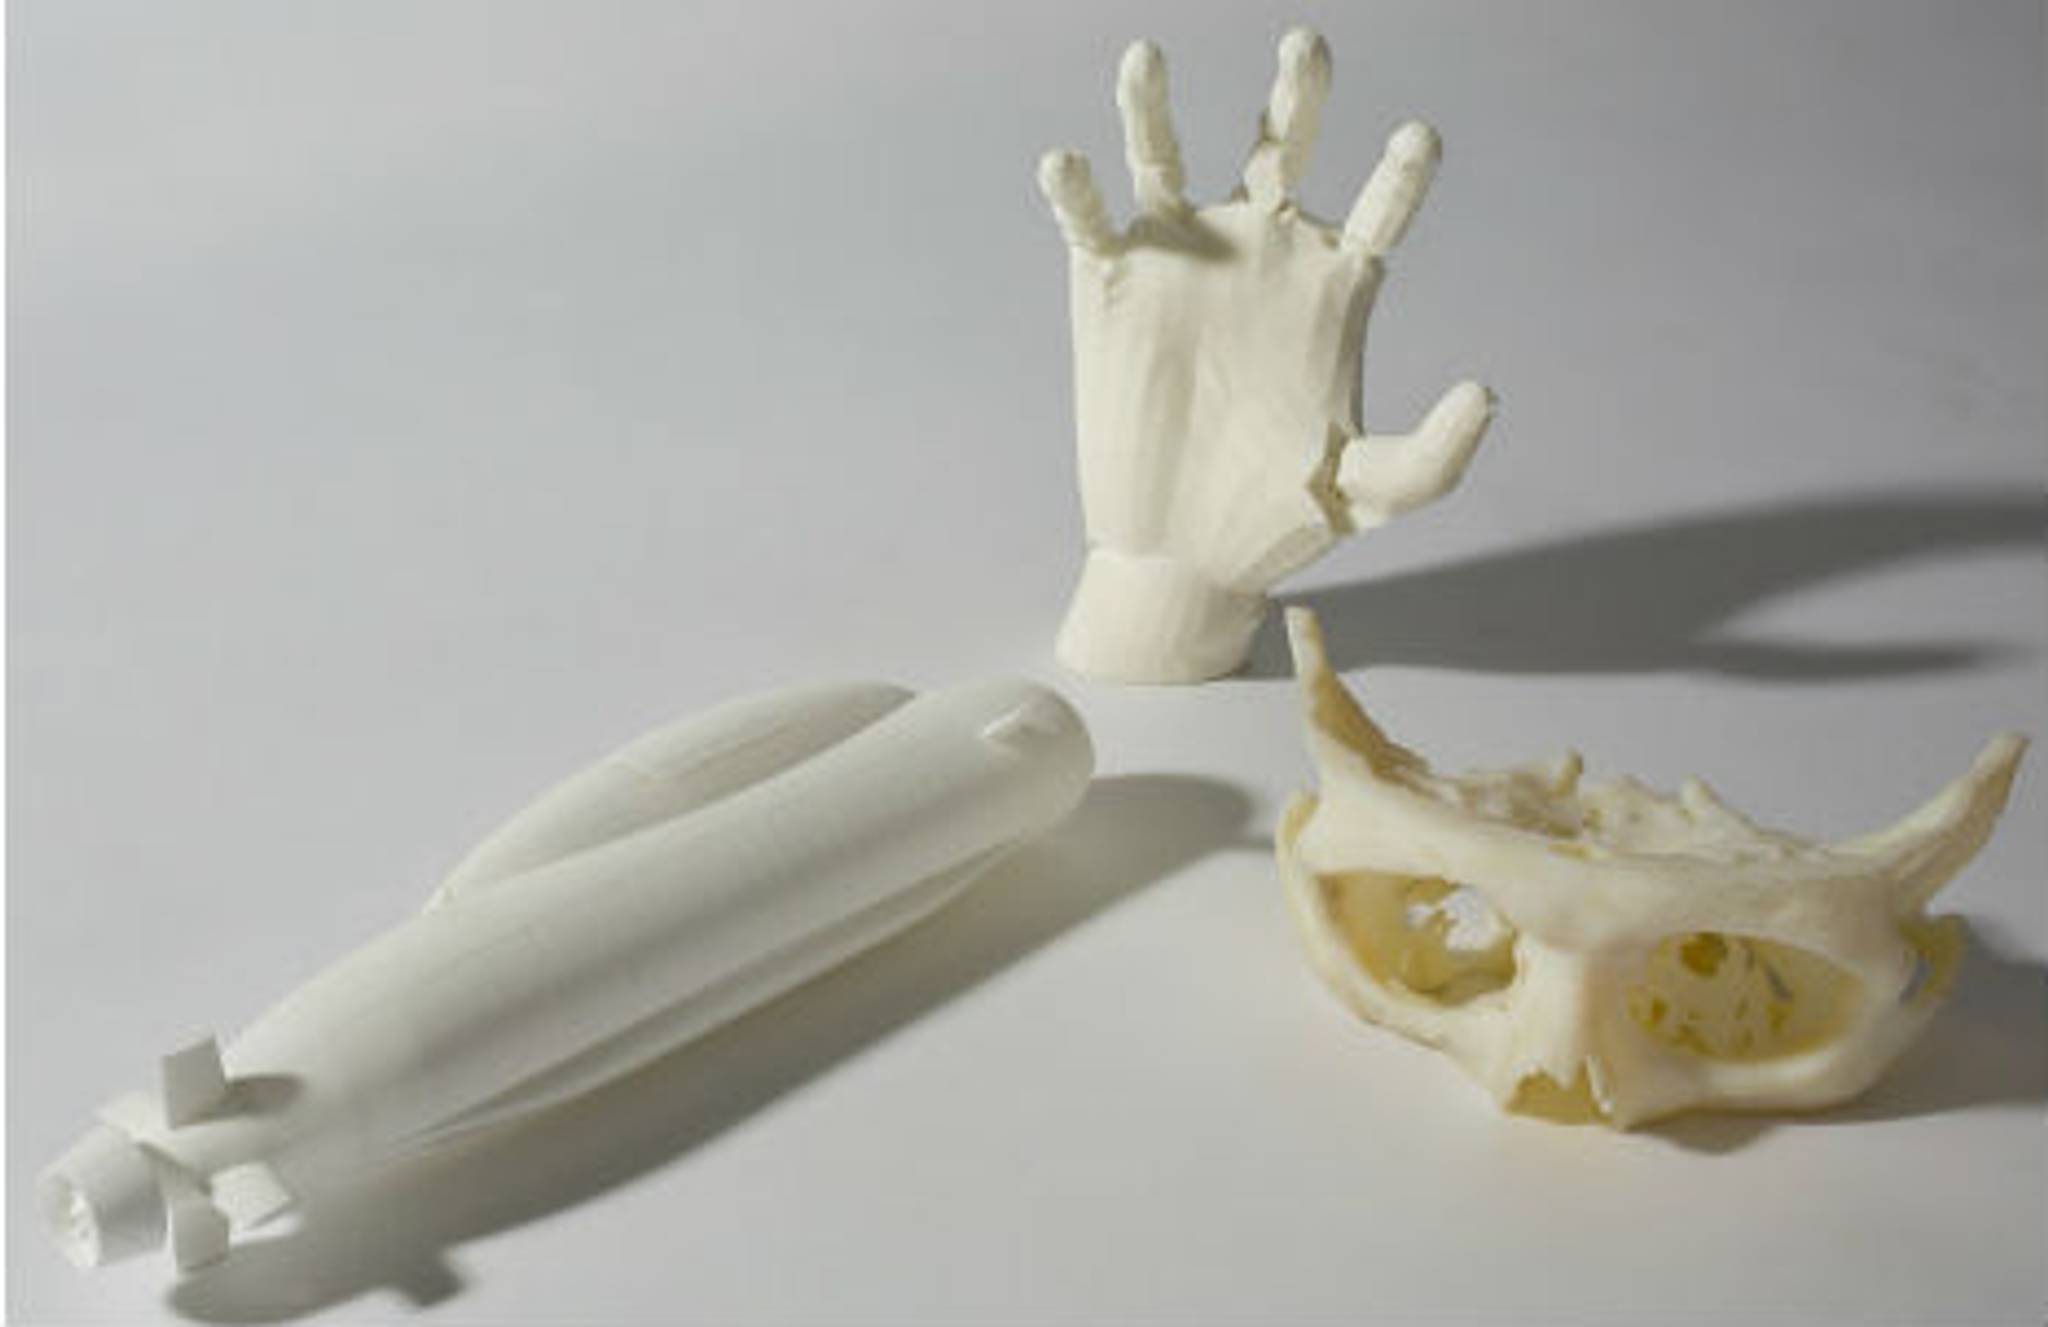 3D-printed art you can touch